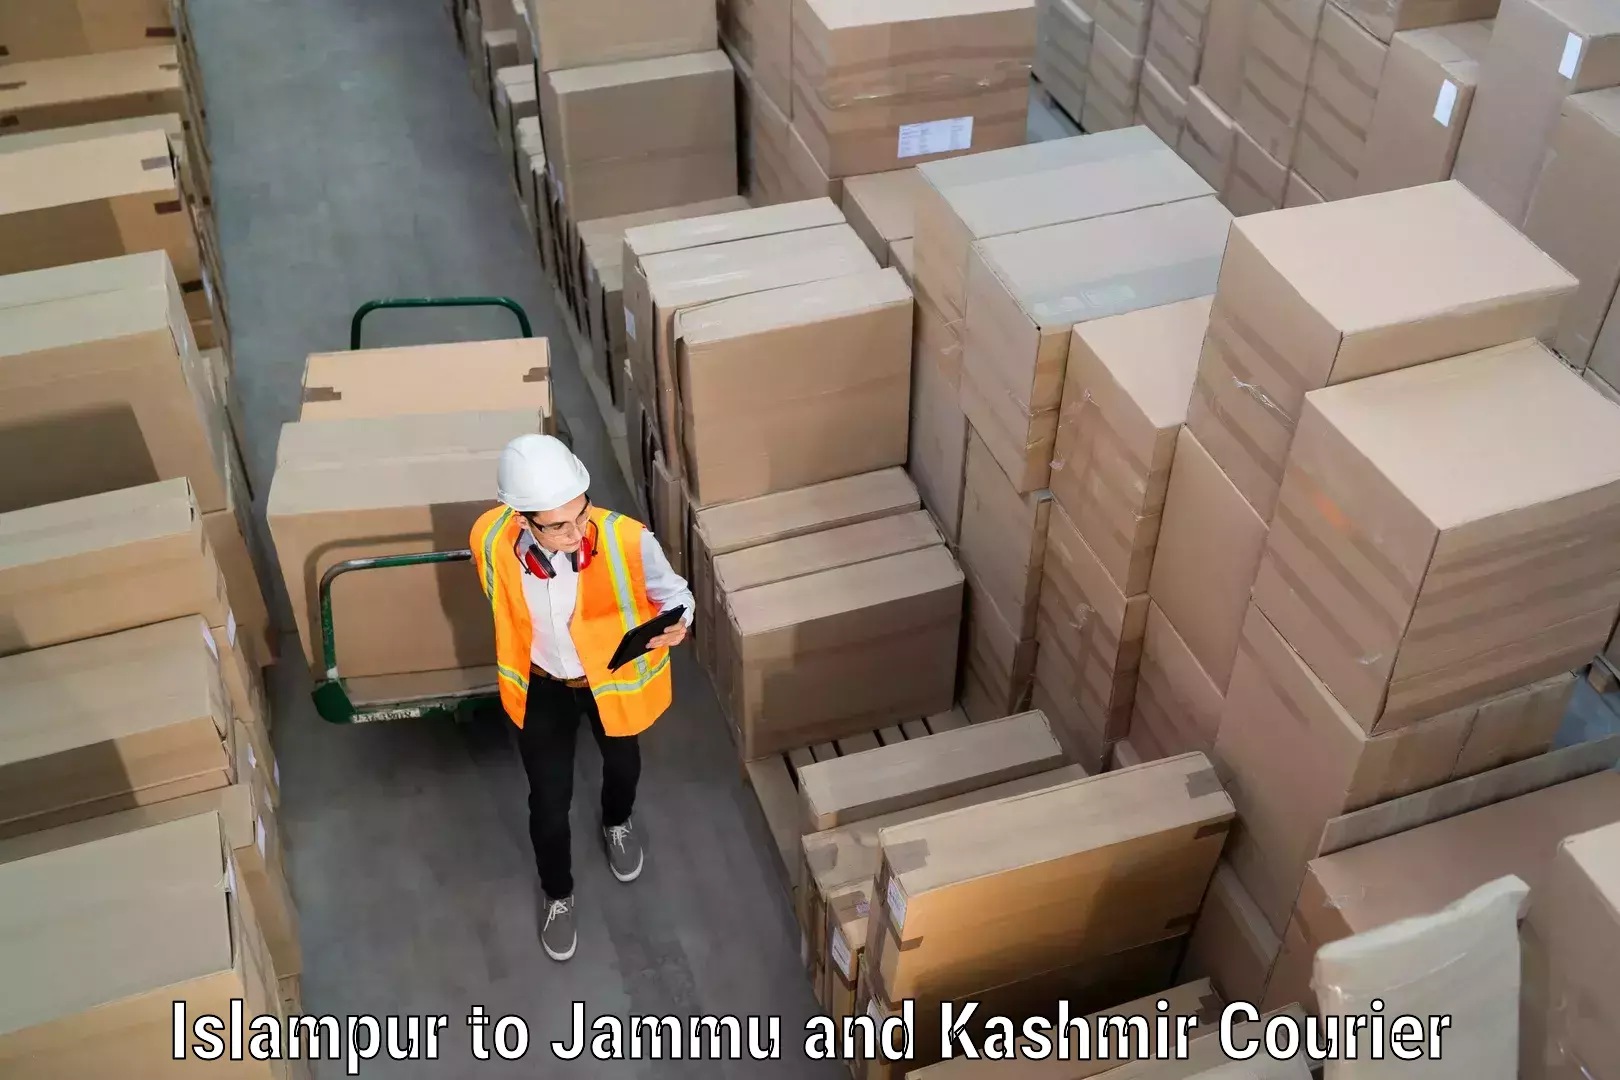 Affordable relocation services in Islampur to Jammu and Kashmir